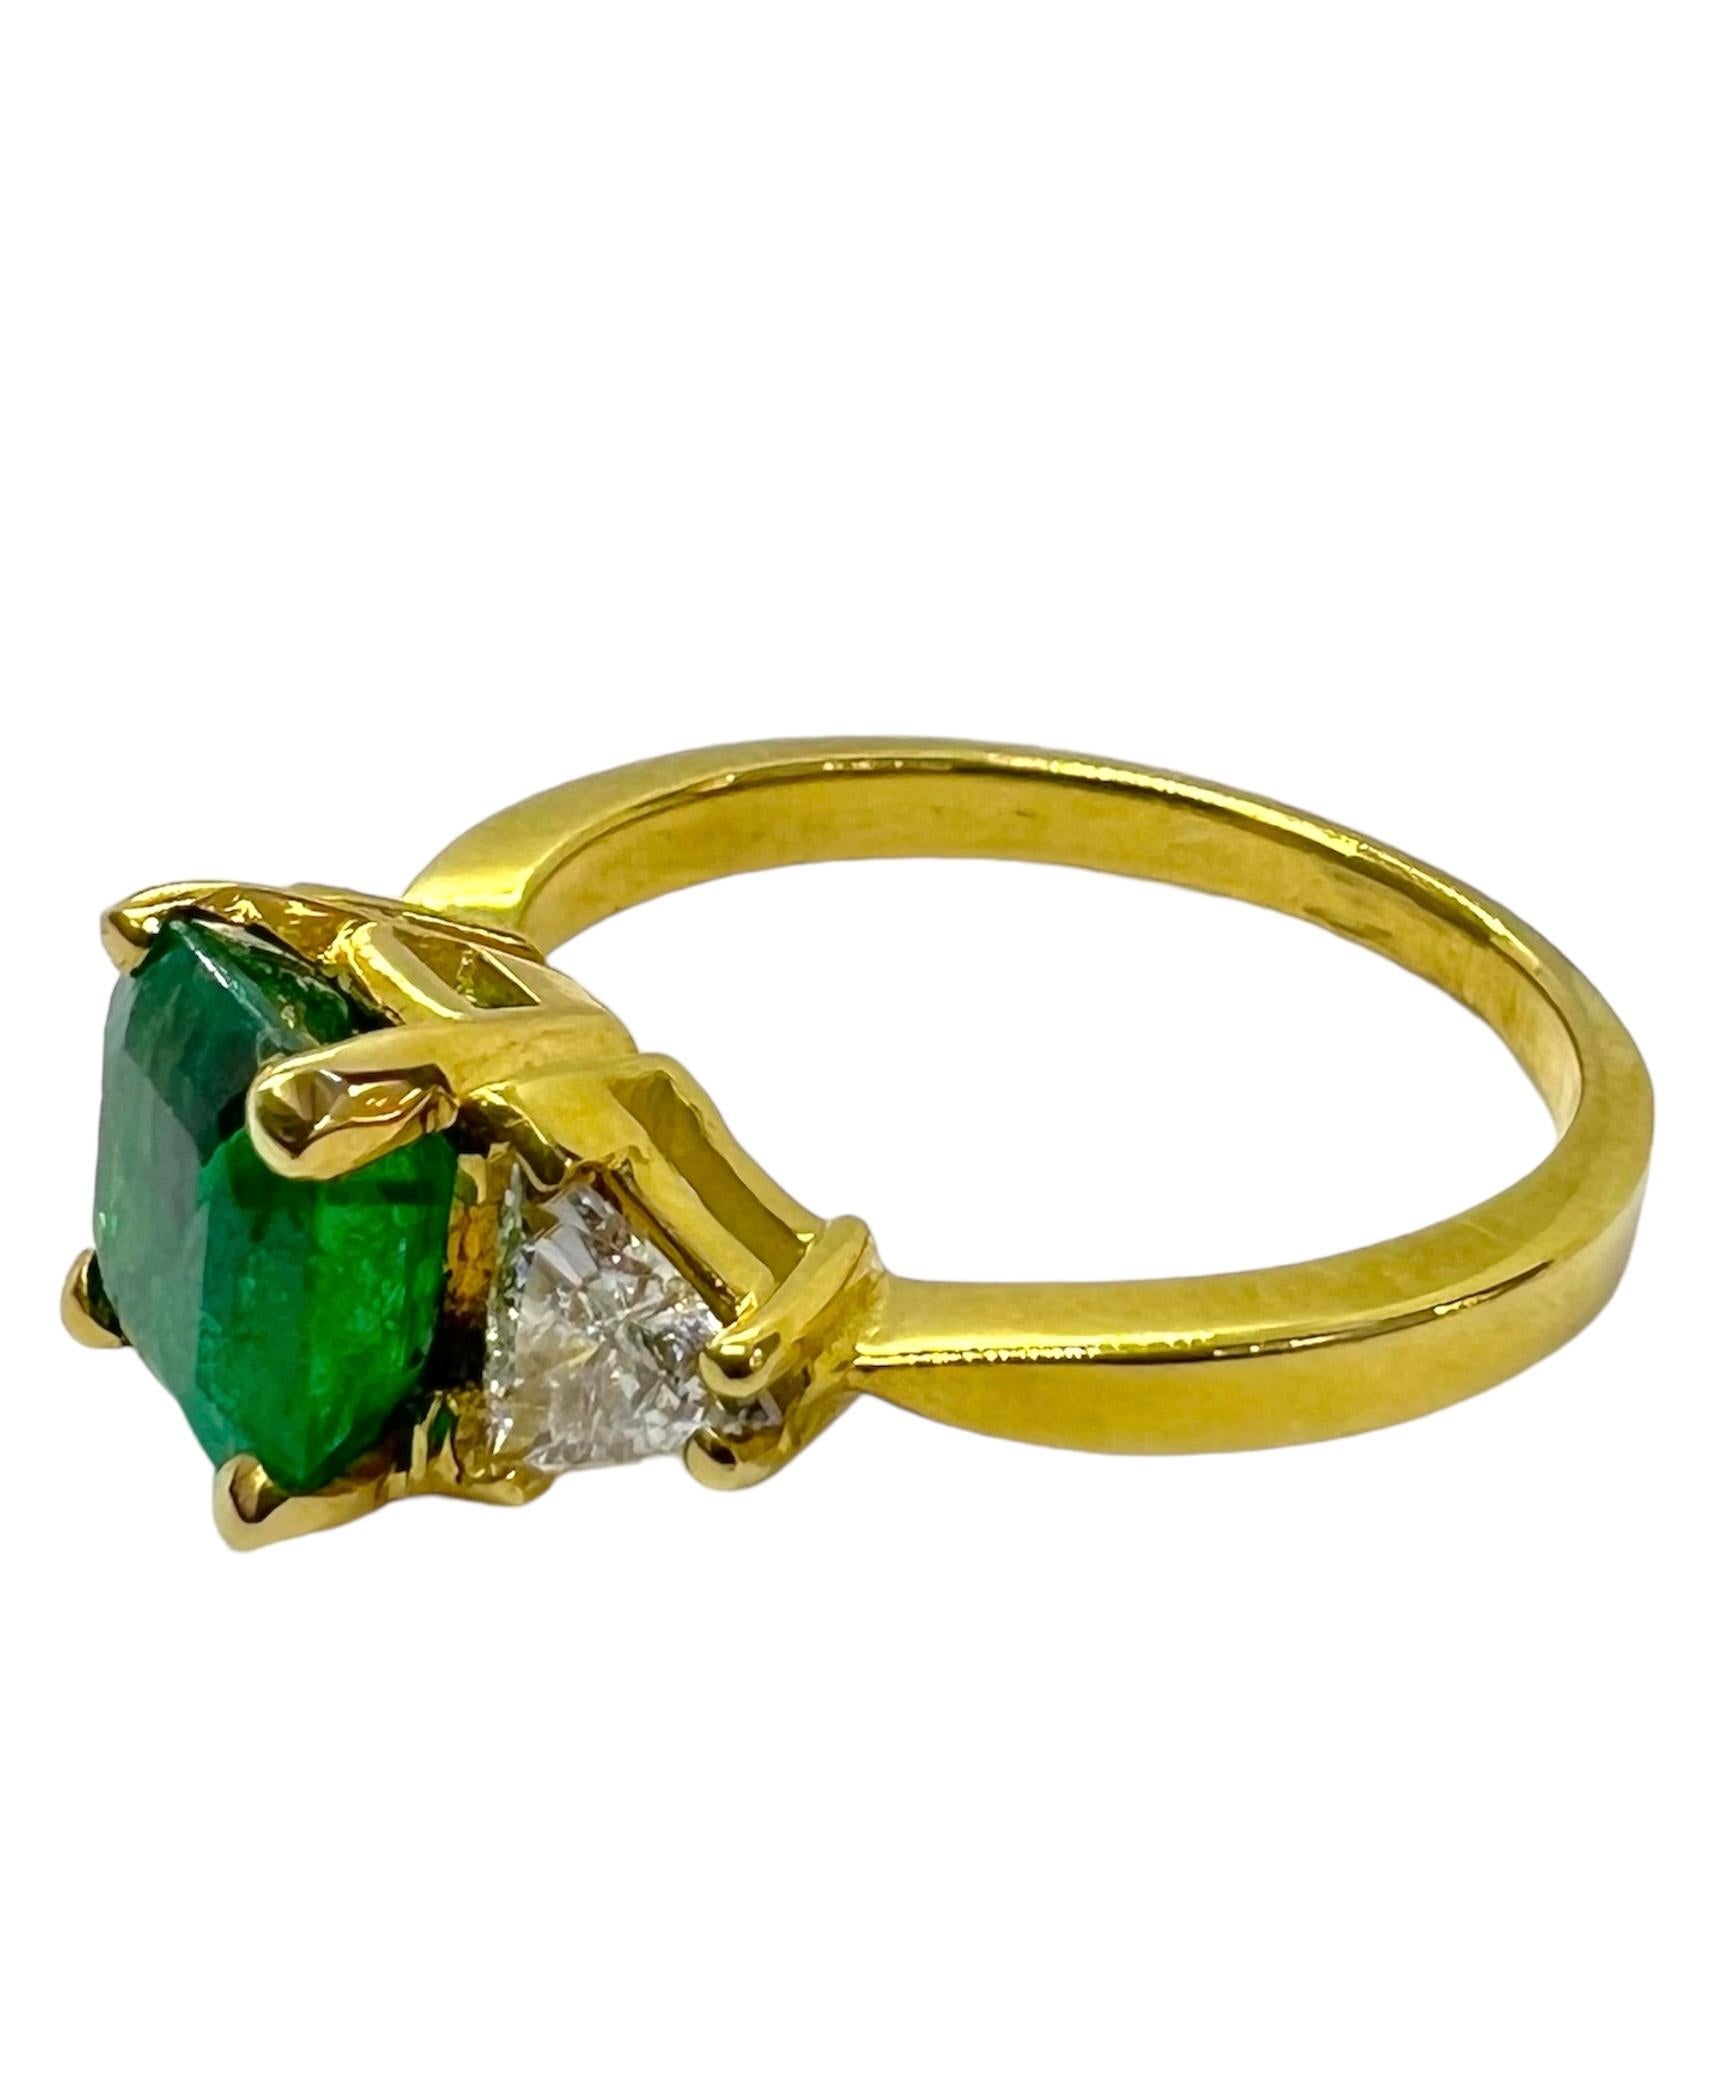 18K yellow gold ring with emerald center stone flanked by trillion cut diamonds.

Sophia D by Joseph Dardashti LTD has been known worldwide for 35 years and are inspired by classic Art Deco design that merges with modern manufacturing techniques.